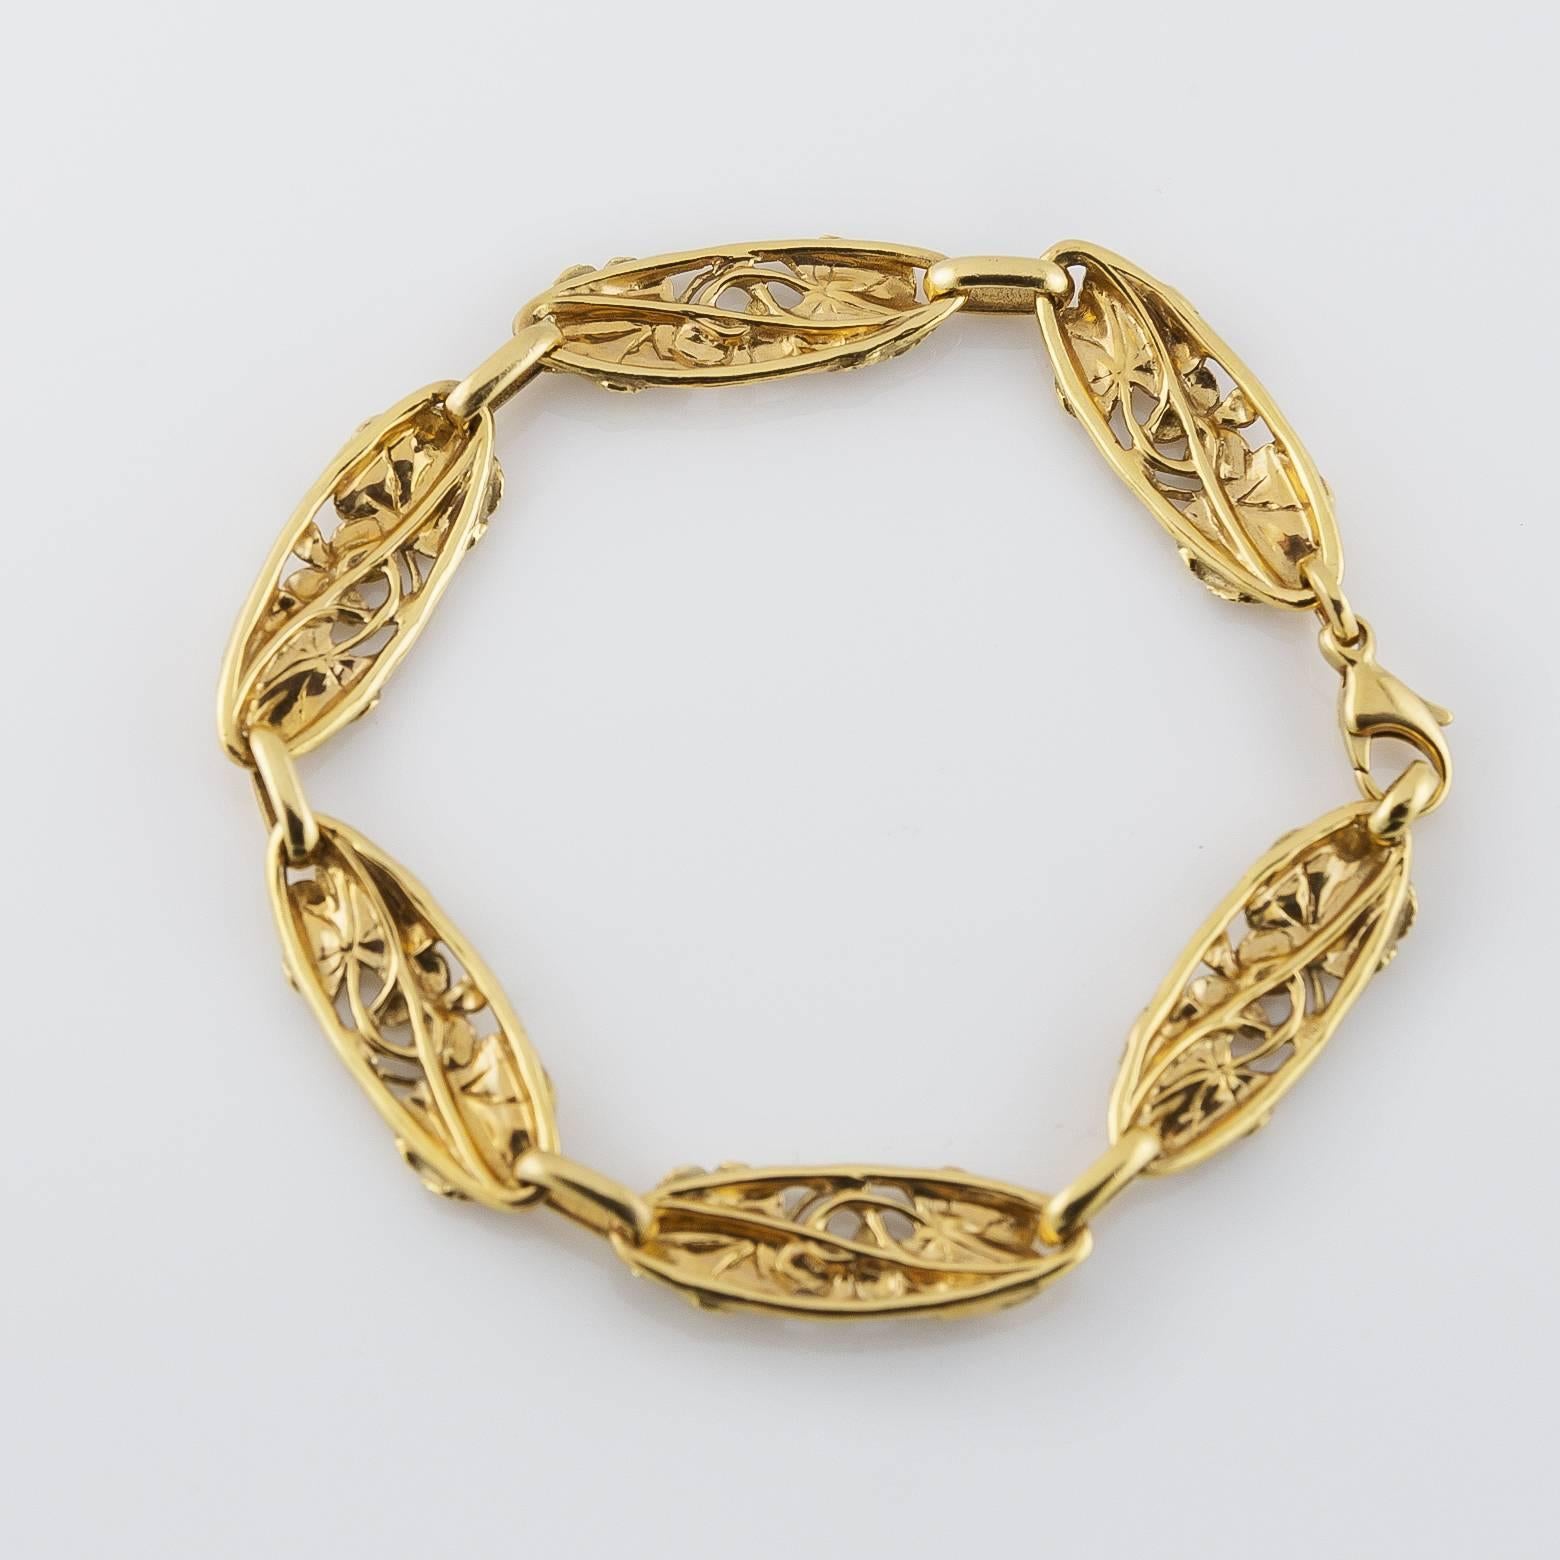 Arnould is a French Company founded in Paris in the 1890 by Aime Arnould. This gorgeous and detailed bracelet is a re-edition of an Art Nouveau classic from the turn of the century. This piece was made in Paris in 1990 with a French stamp. The